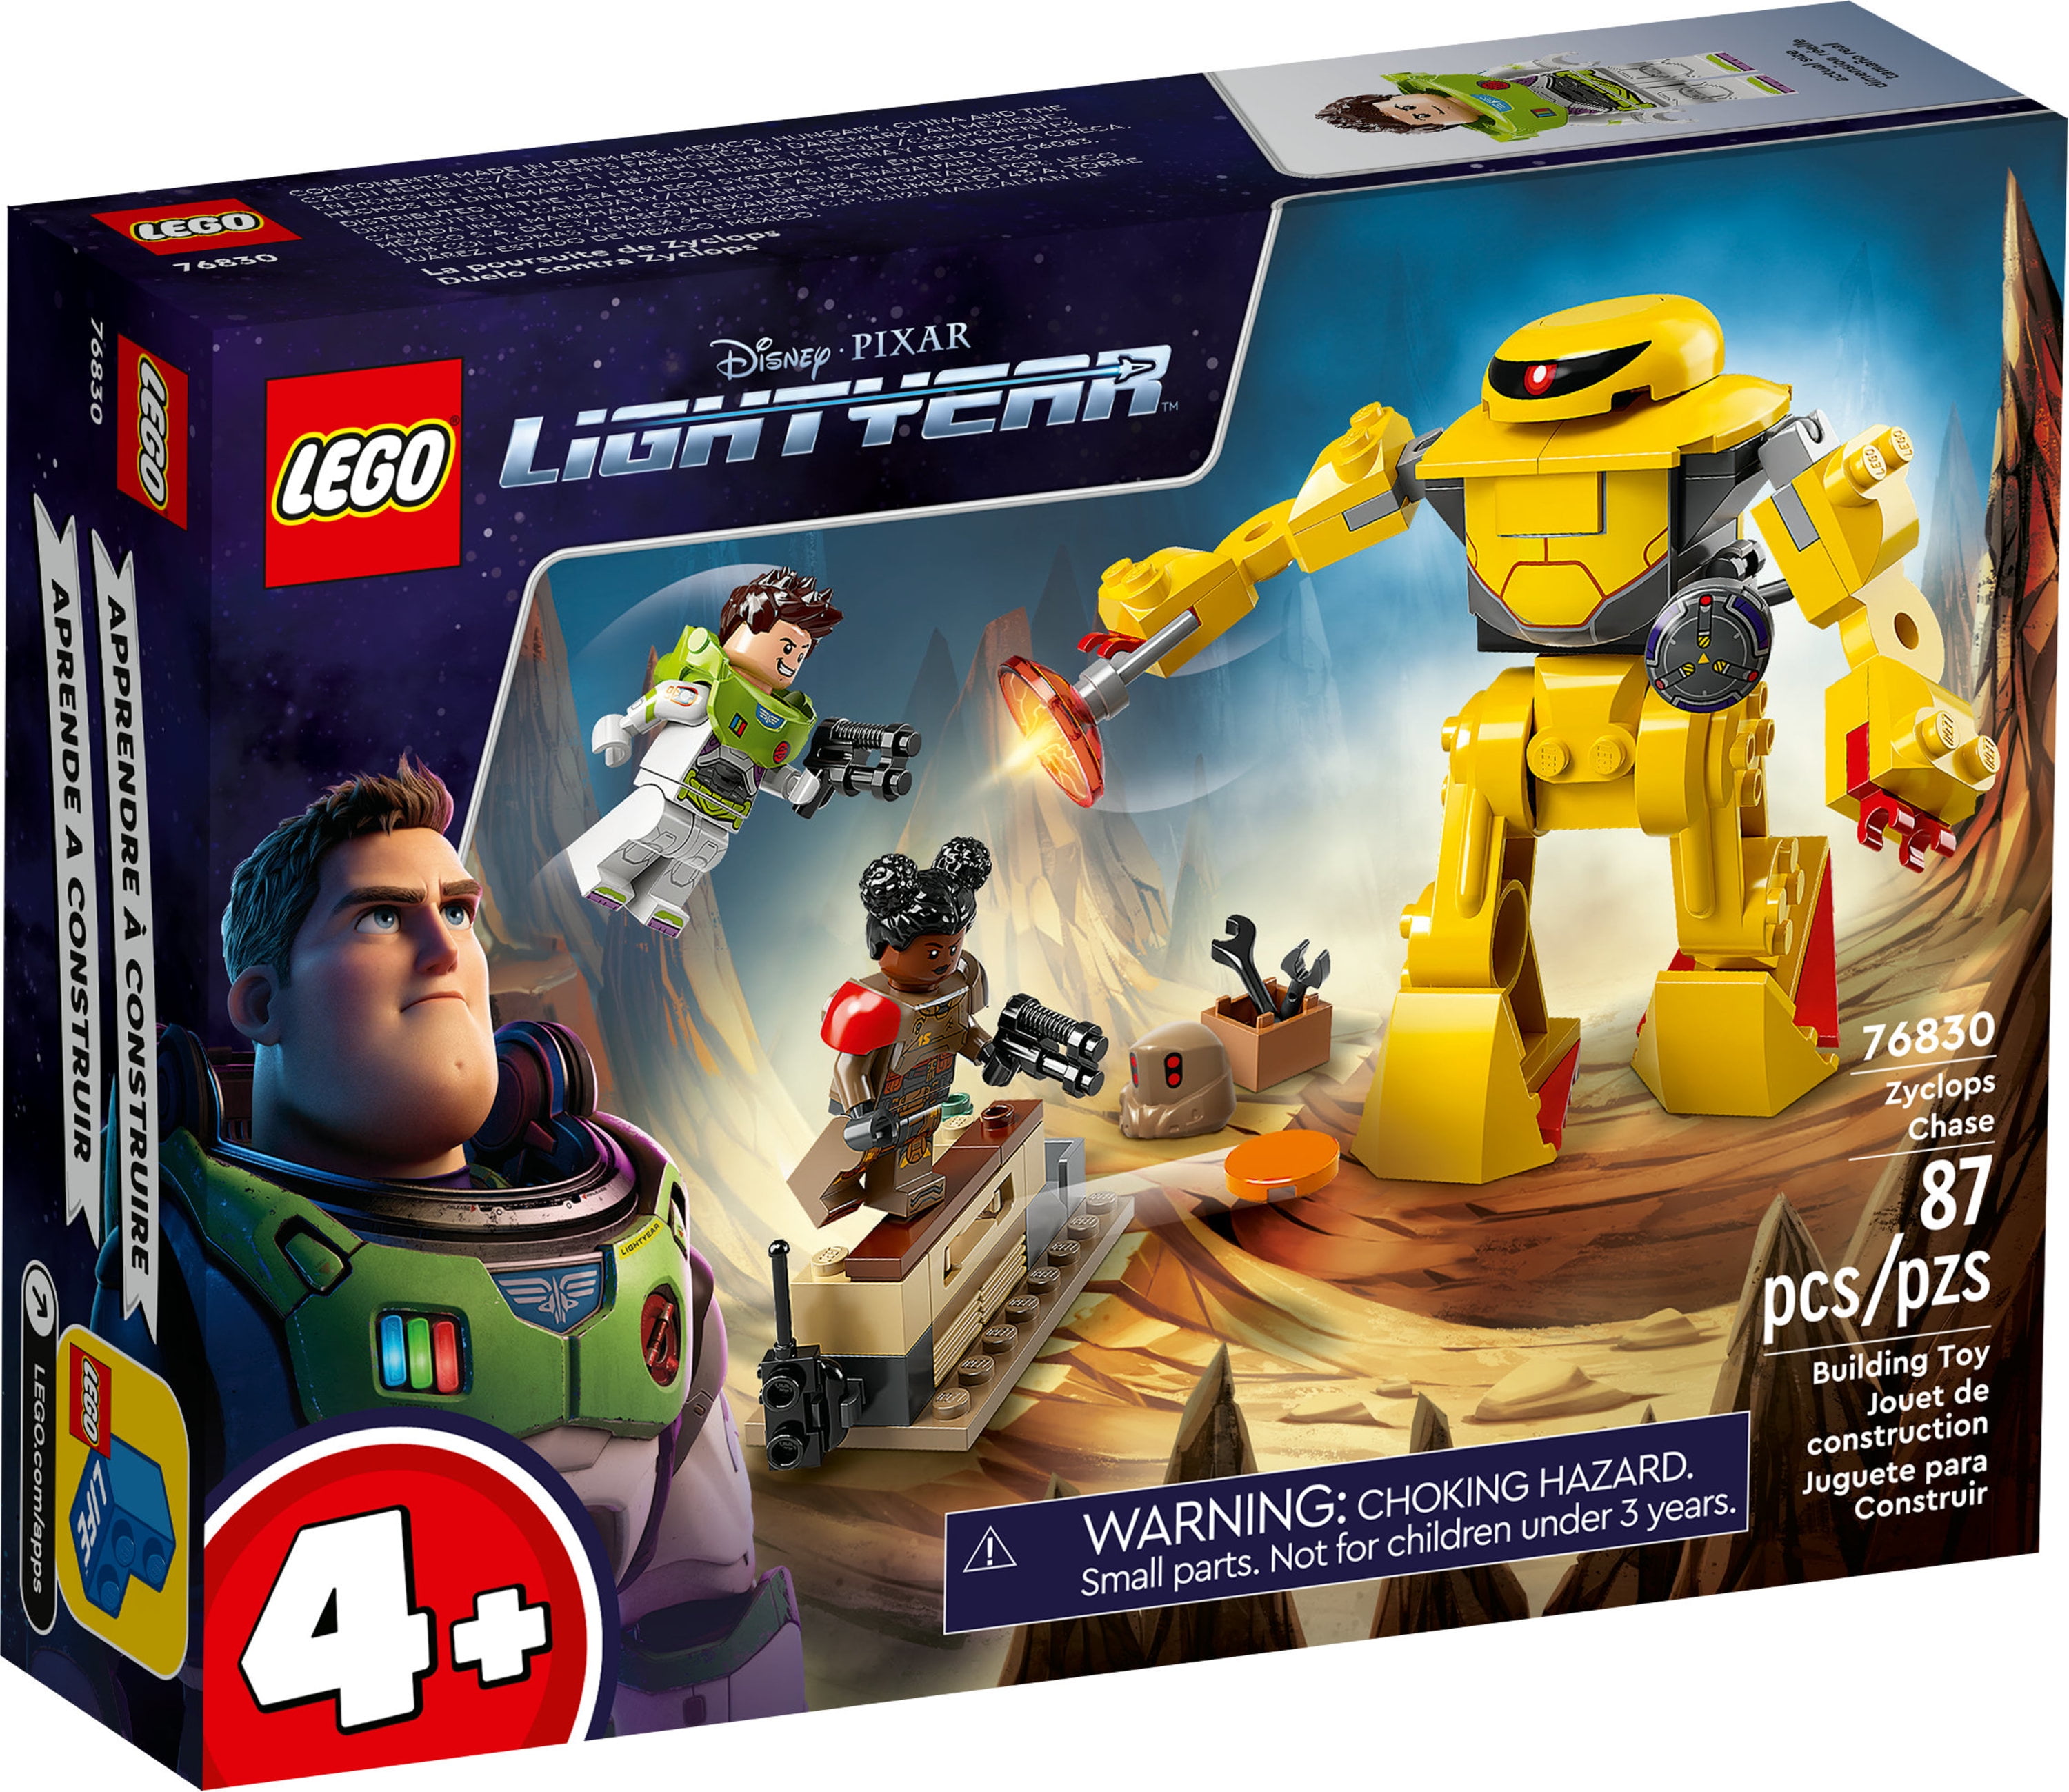 76830, Zyclops Lightyear for and Space LEGO Old Year Figure plus Action Toy Building Chase 4 and Disney Pixar\'s Kids Mech Buzz Robot Minifigure with